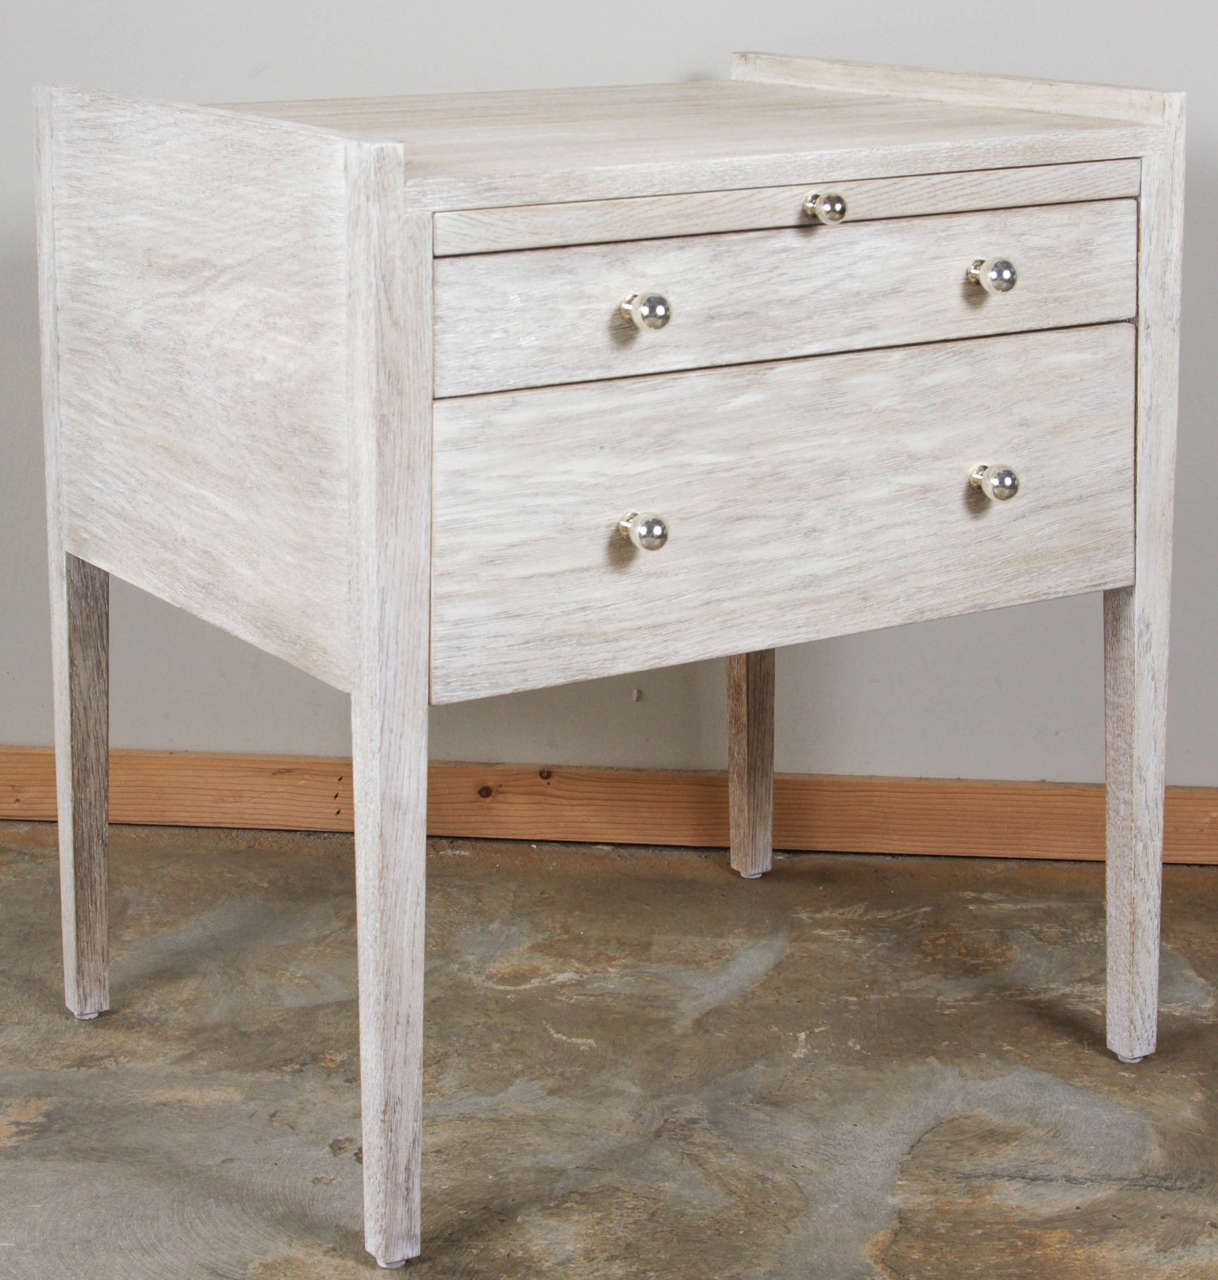 Pair of two-drawer distressed side tables or nightstands with pull-out tray and silver plated knobs.